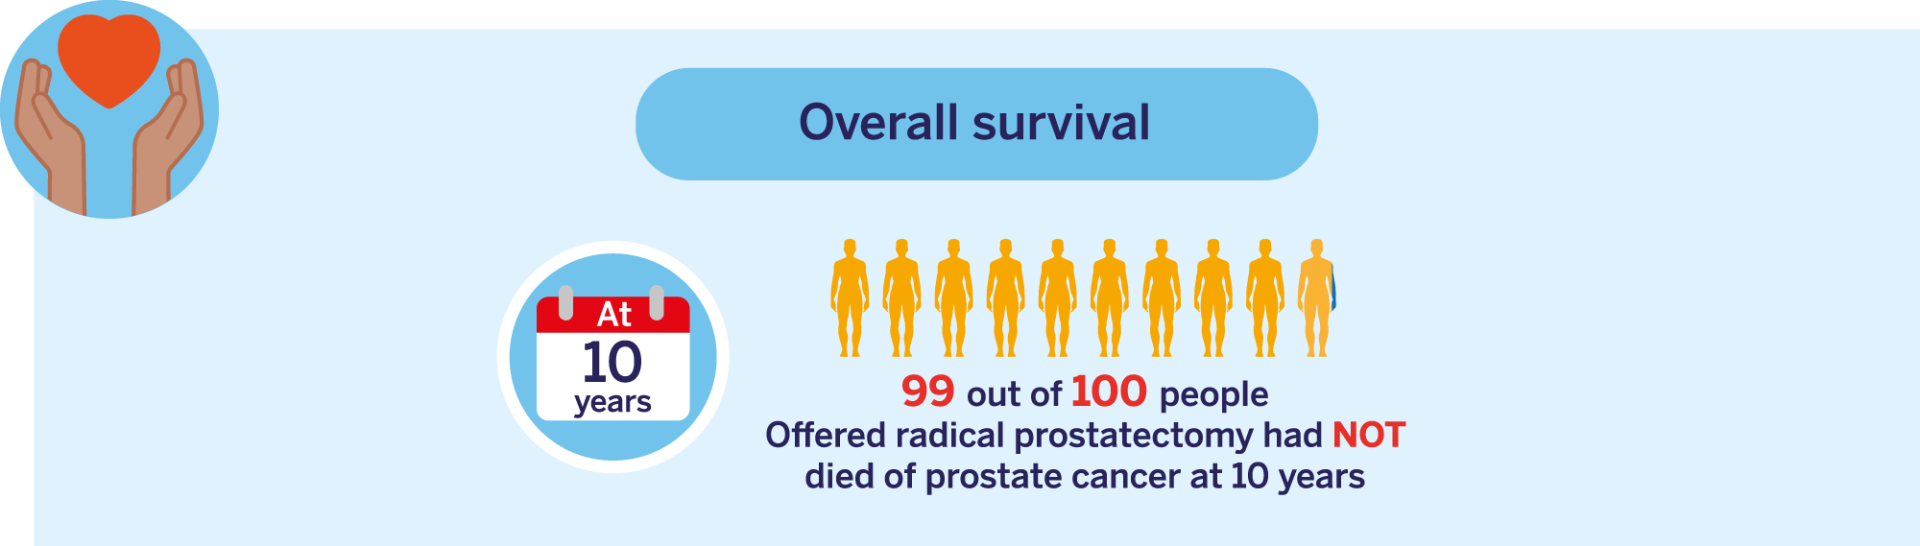 Radical prostatectomy overall survival